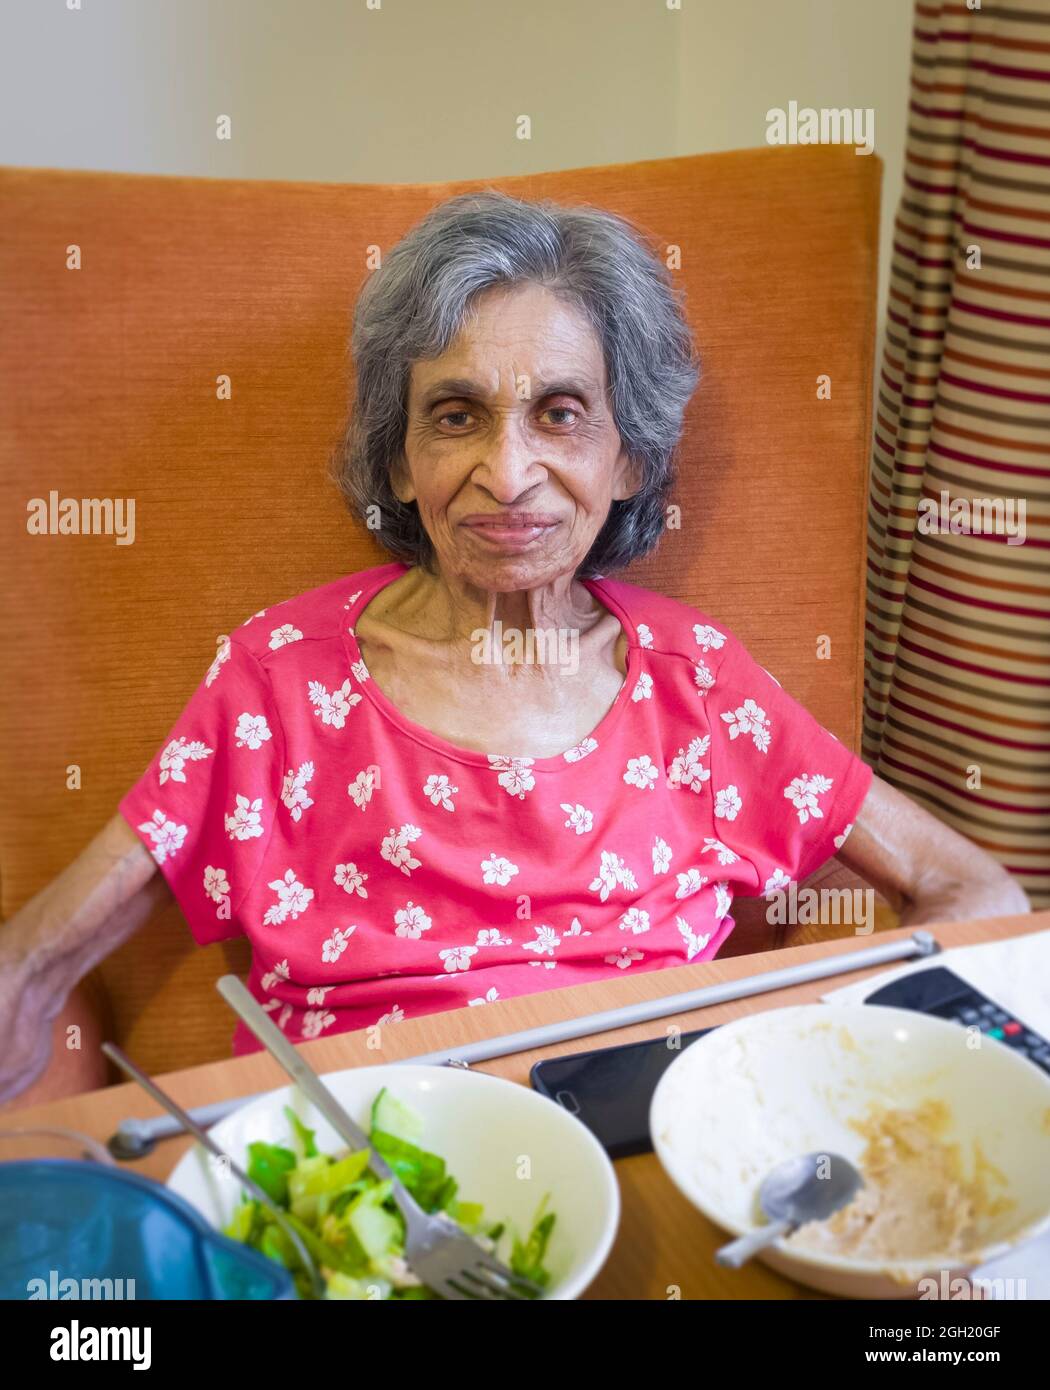 Elderly Indian woman in a care home or nursing home, UK, sitting in a chair eating a meal. Depicts frailty and malnutrition in old age Stock Photo